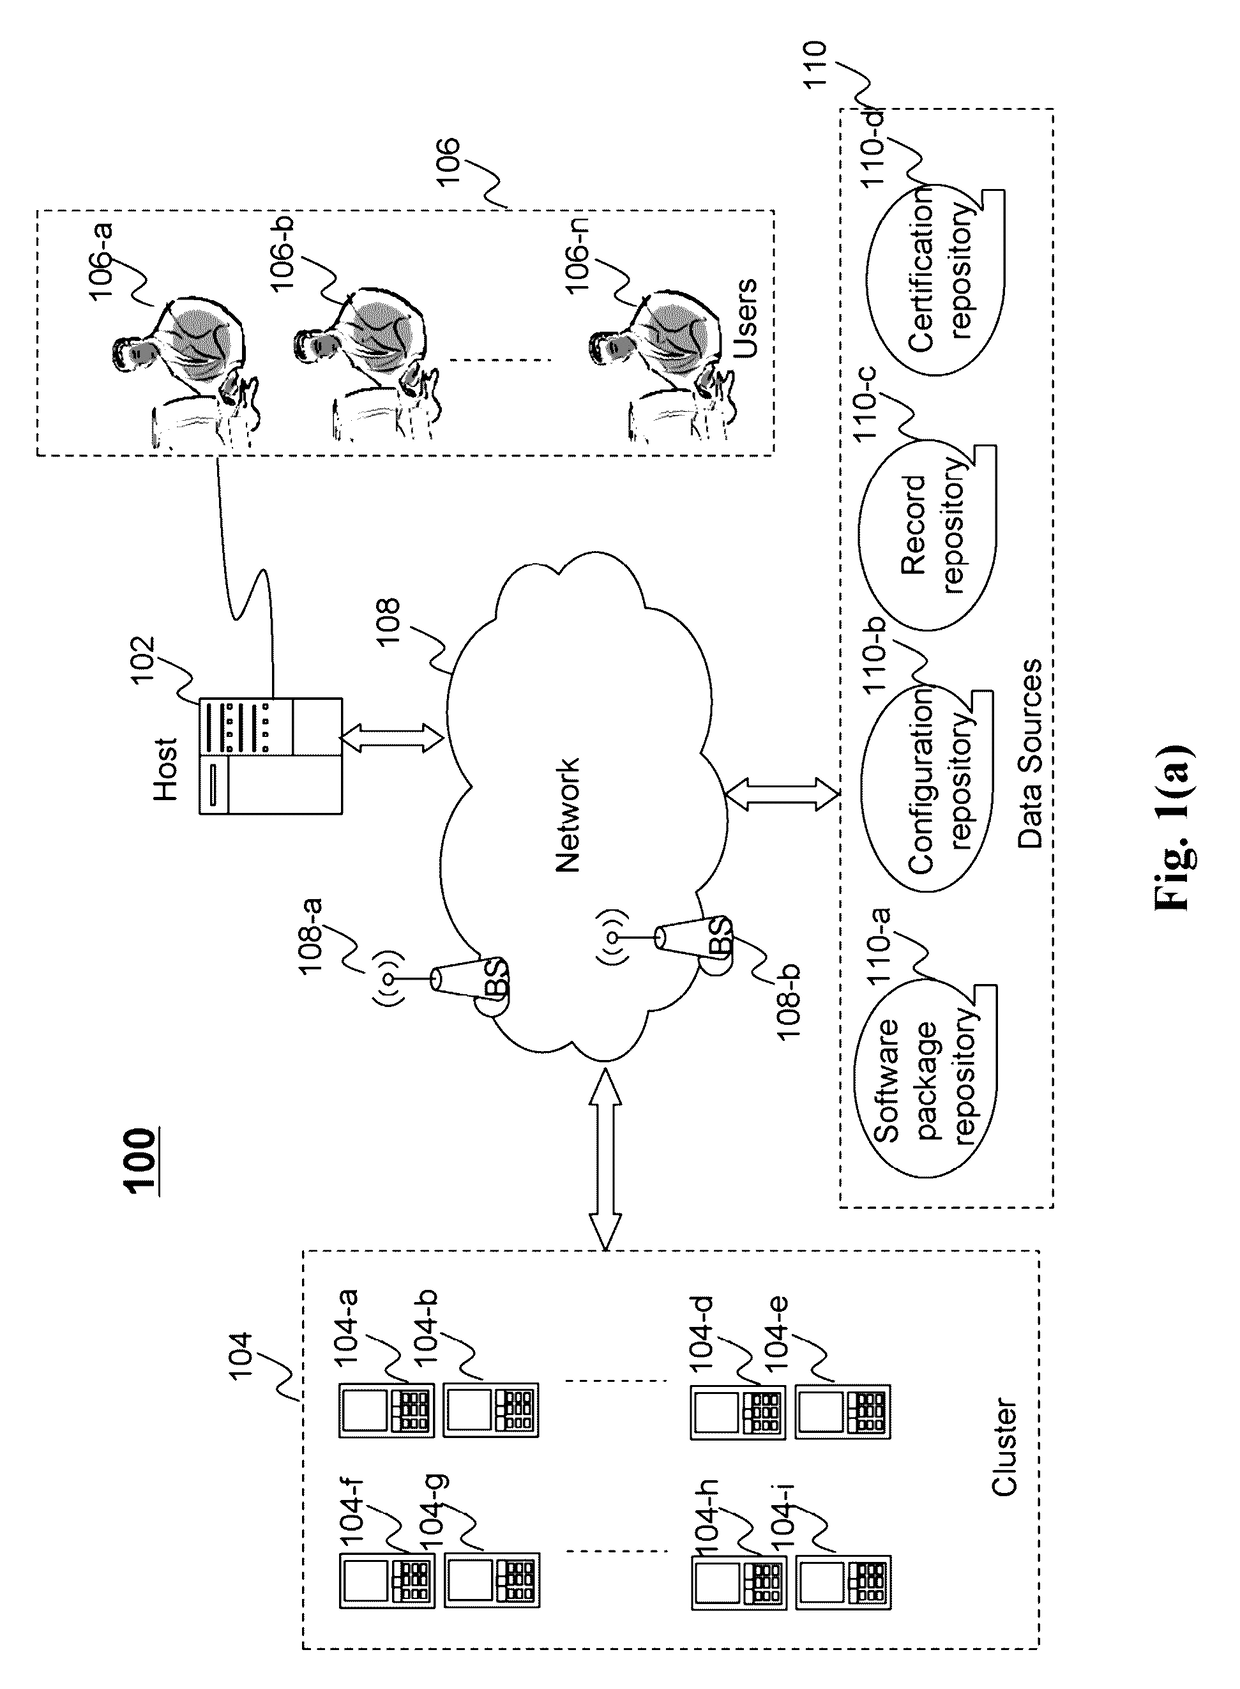 Method and system for distributed application stack test certification